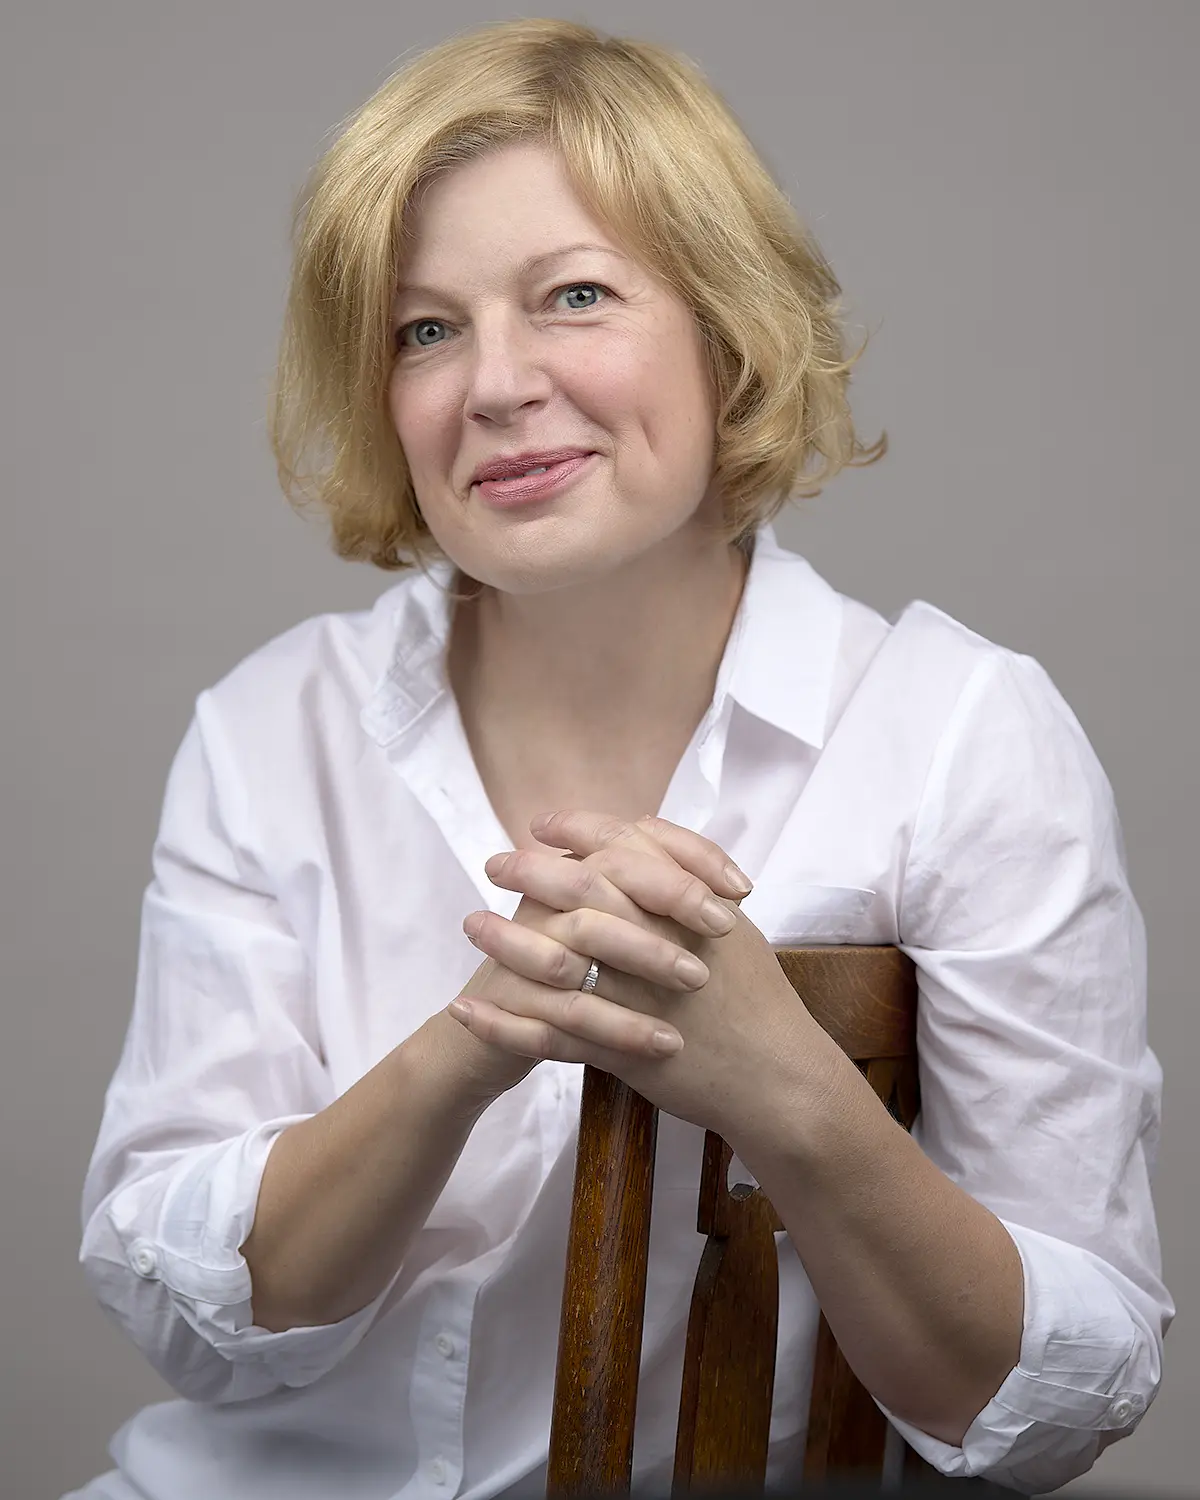 Professional Business Portrait of a blonde woman seated on a chair